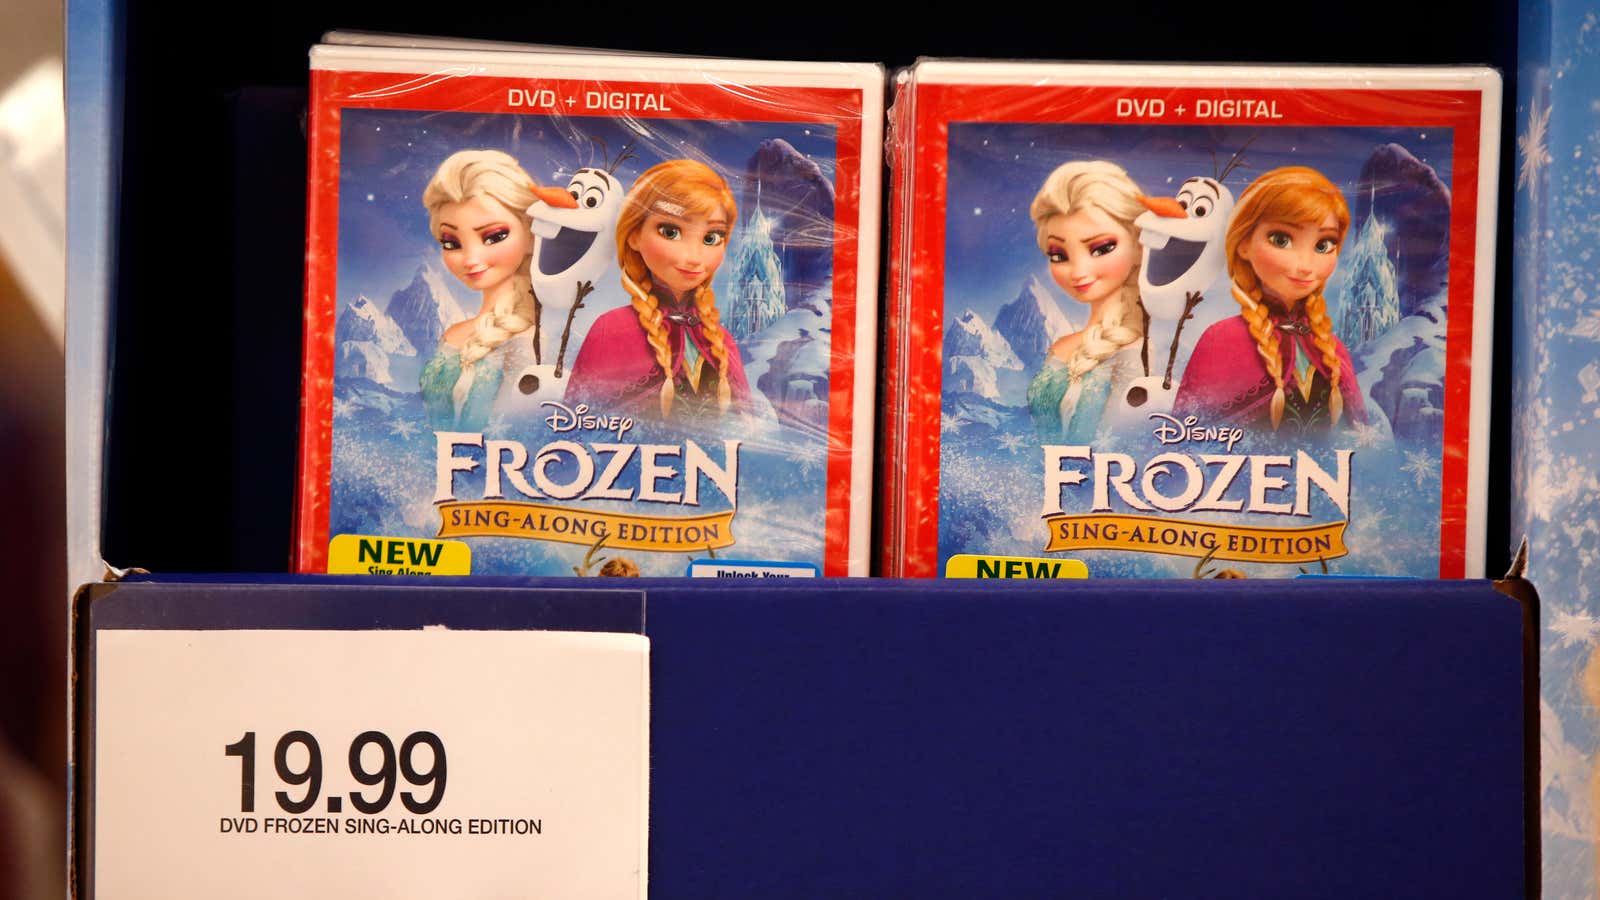 Consumers just let it go.